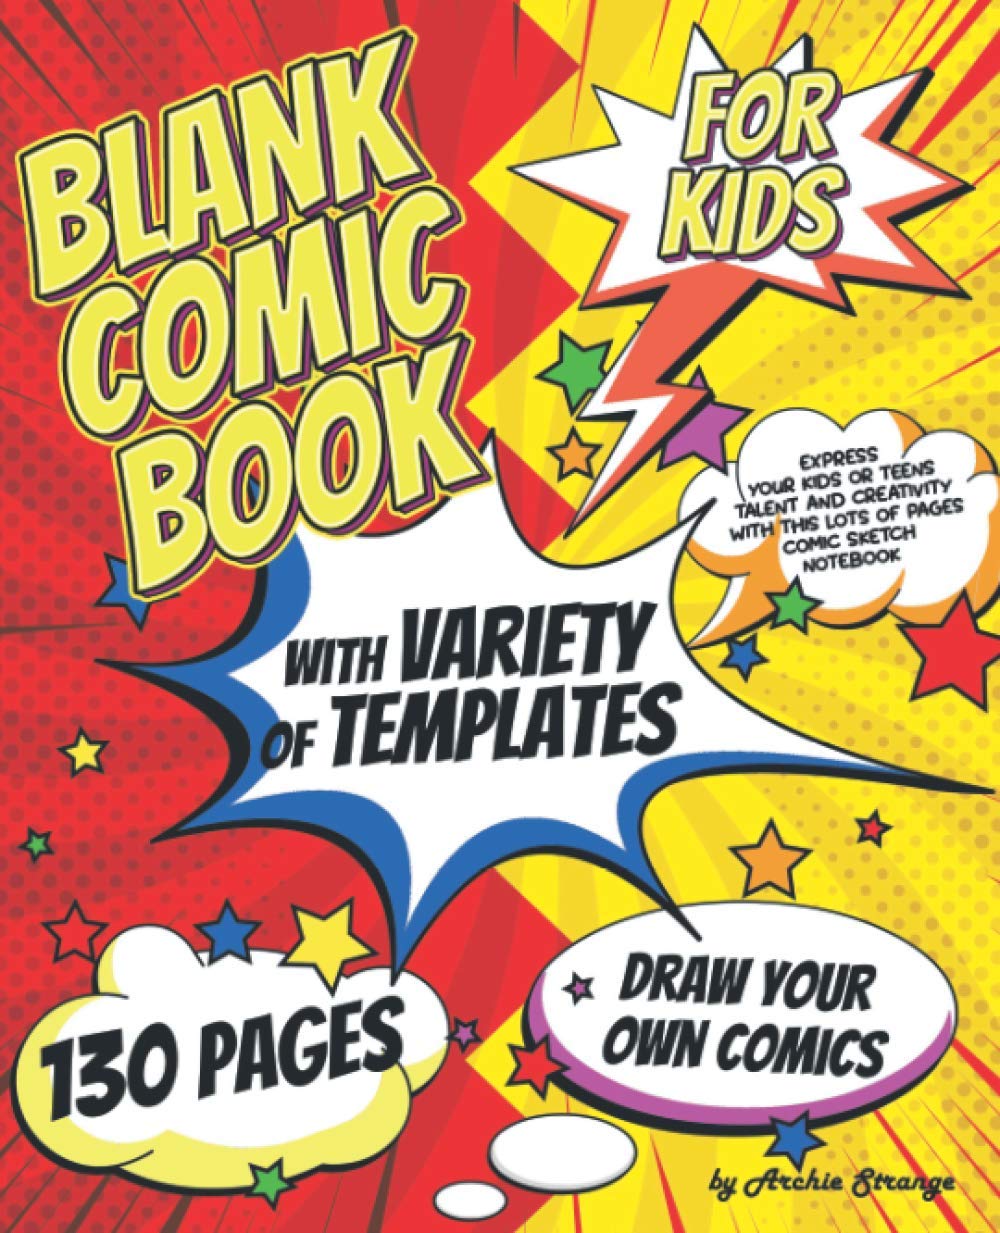 Blank Comic Book for Kids with Variety of Templates: Draw Your Own Comics - Express Your Kids or Teens Talent and Creativity with This Lots of Pages ... (Blank Comic Books and Sketchbooks for Kids)